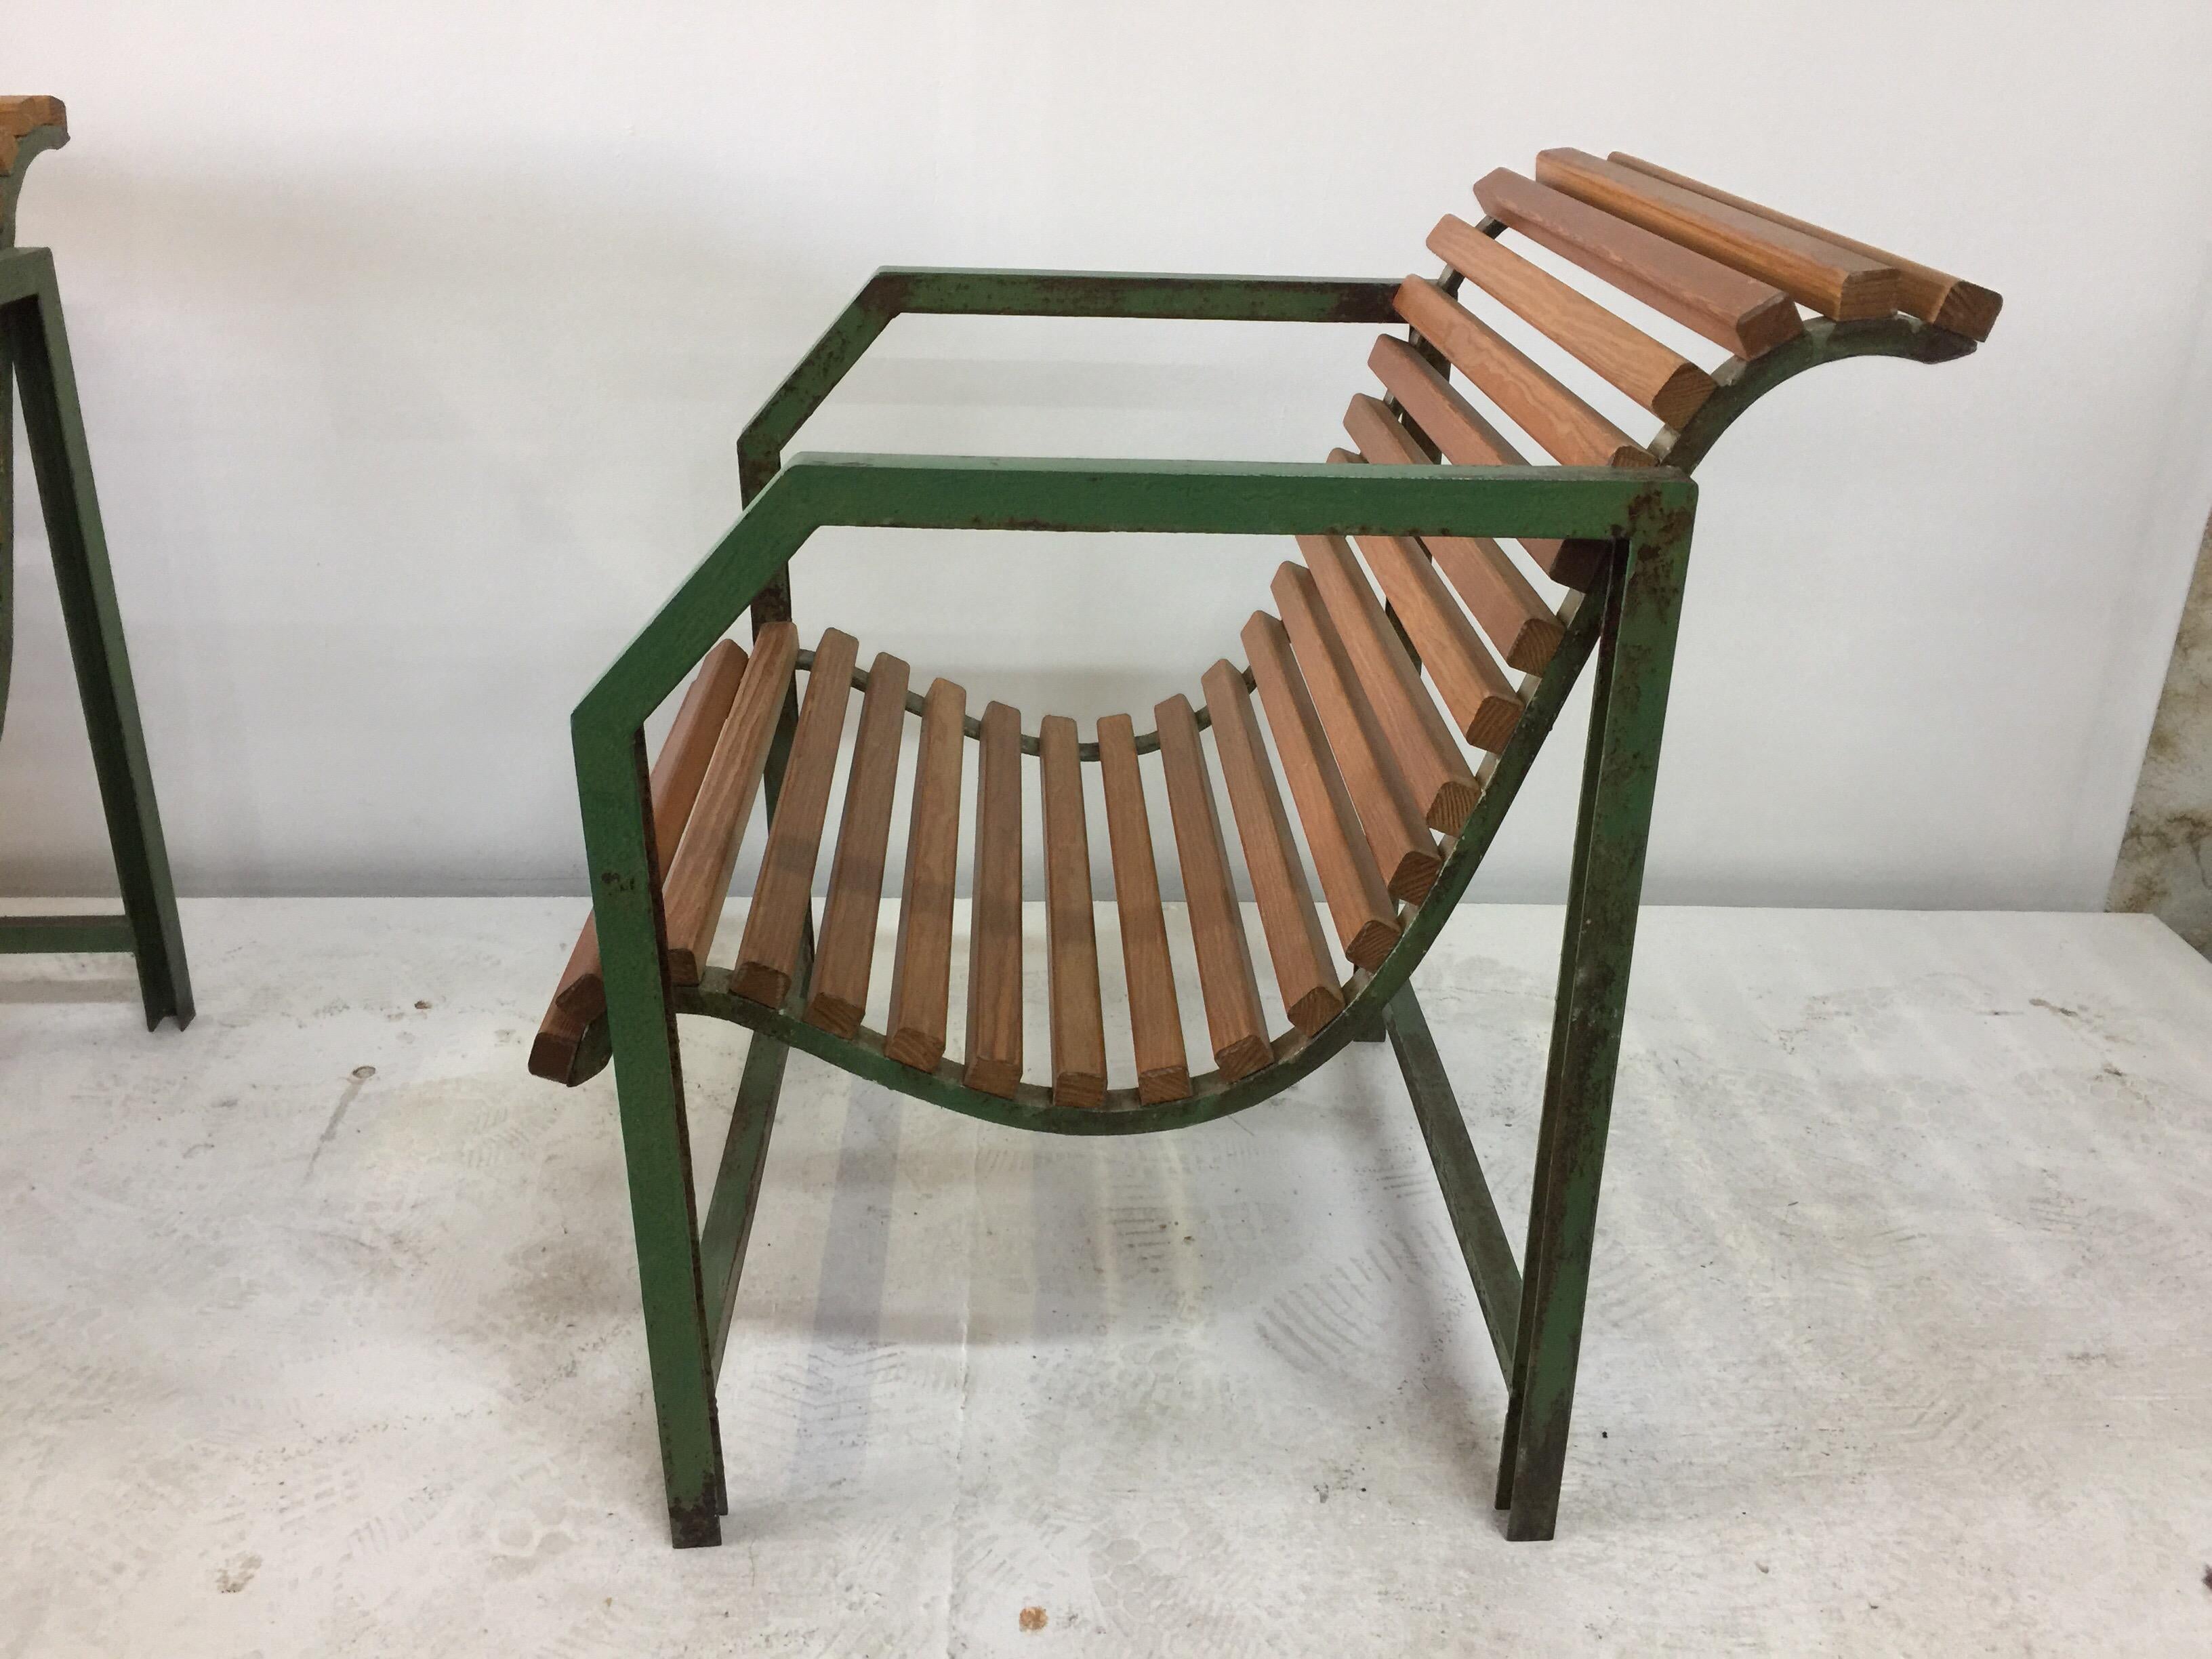 Wood slays and aged green painted metal - these geometric style industrial armchairs are chic and very comfortable.